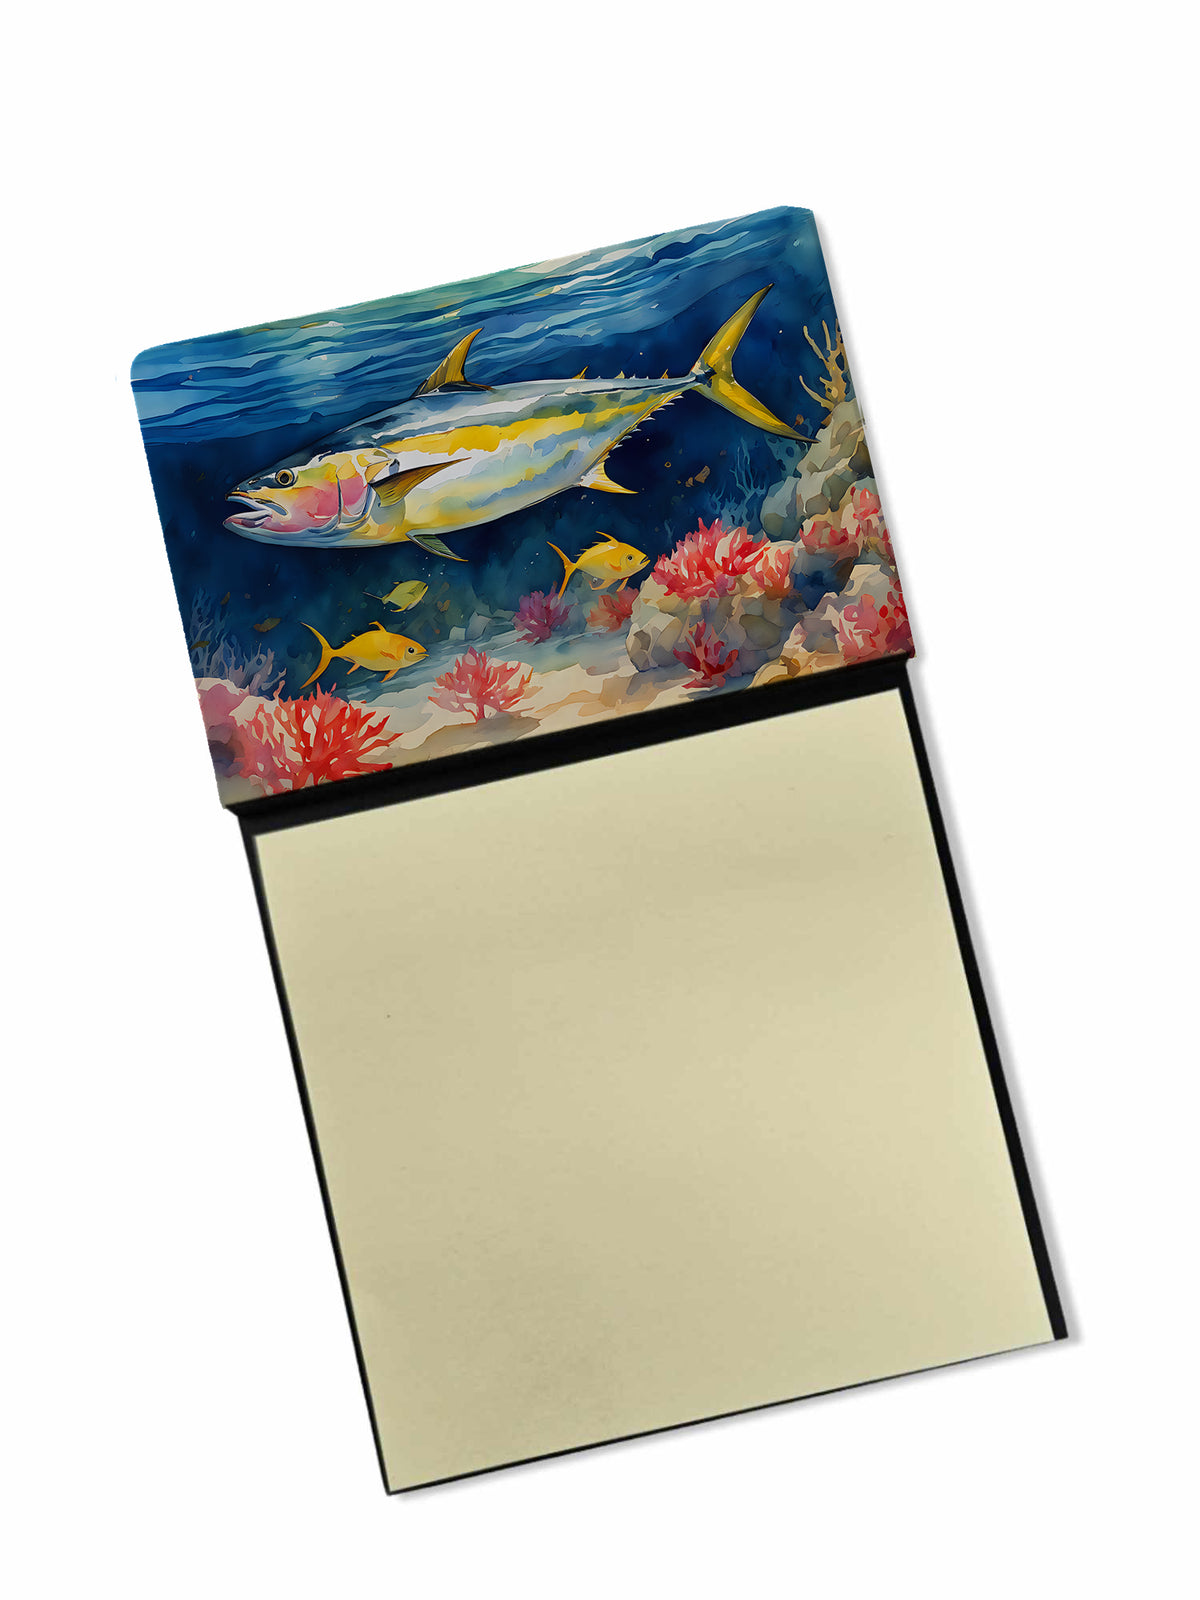 Buy this Yellowfin Tuna Sticky Note Holder